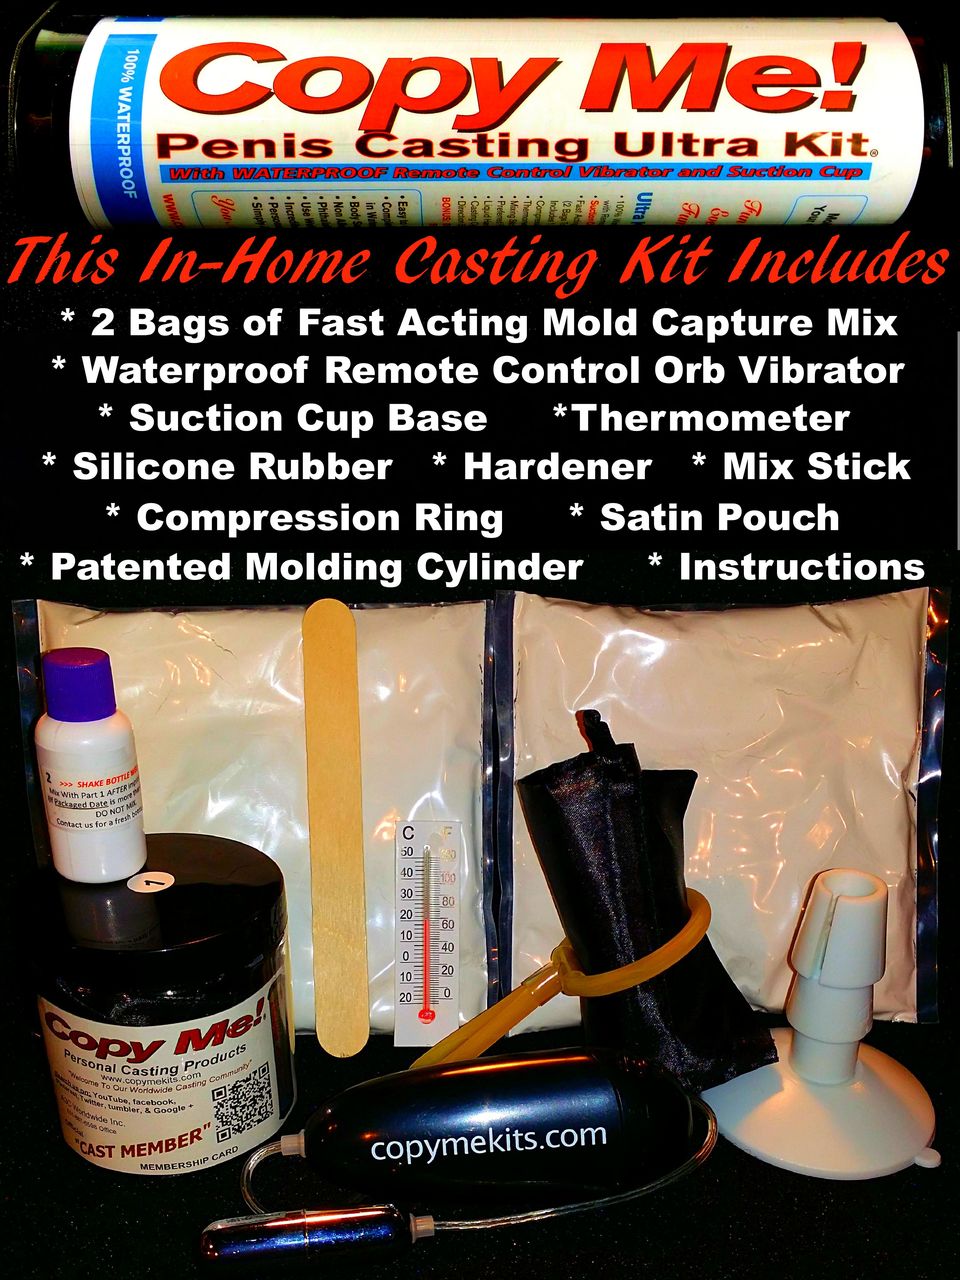 Here are the included parts inside the tube of THE BEST RATED PENIS CASTING KIT worldwide.
Copy Me! Personal Casting Products deliver everything you are looking for when making a copy of your penis.